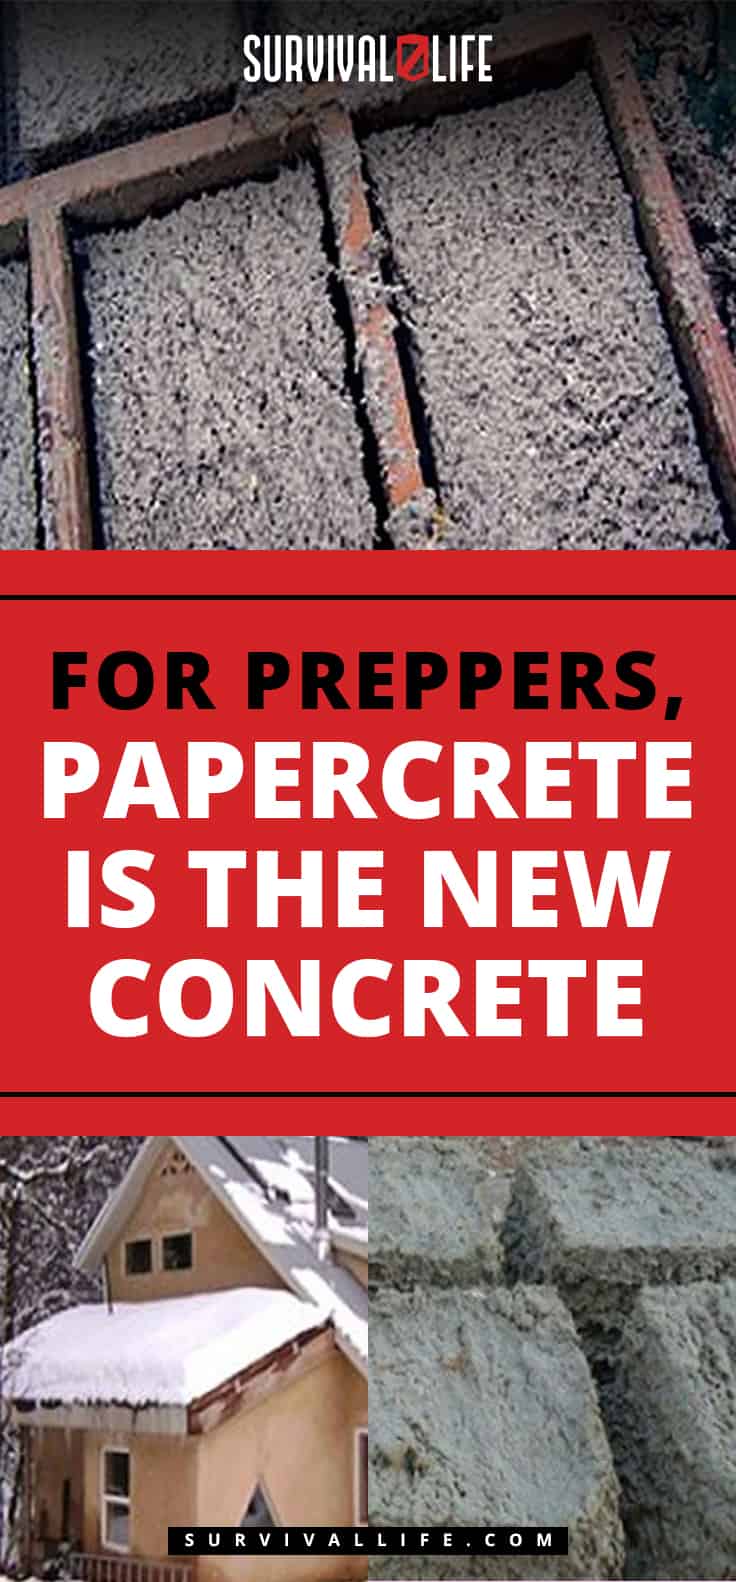 Papercrete | For Preppers, Papercrete Is the New Concrete